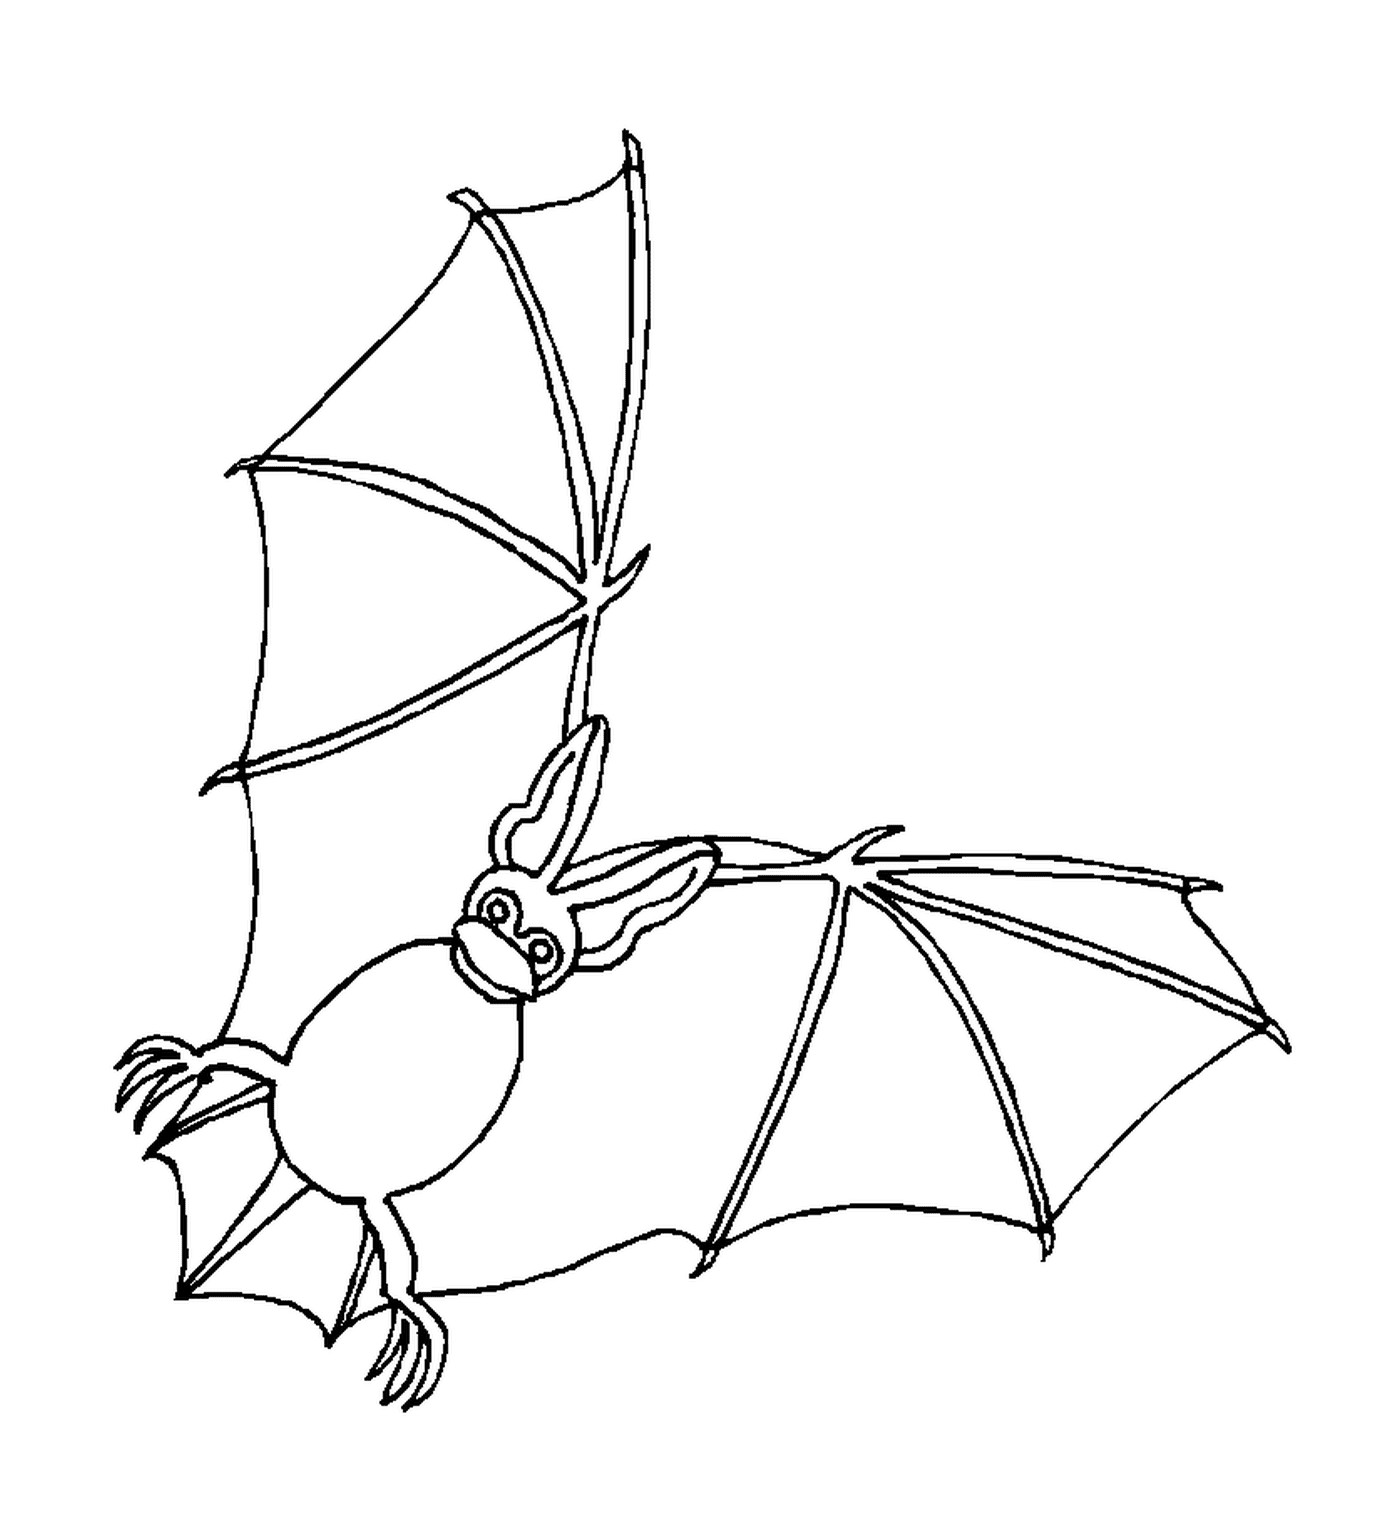  bat flying in the air 